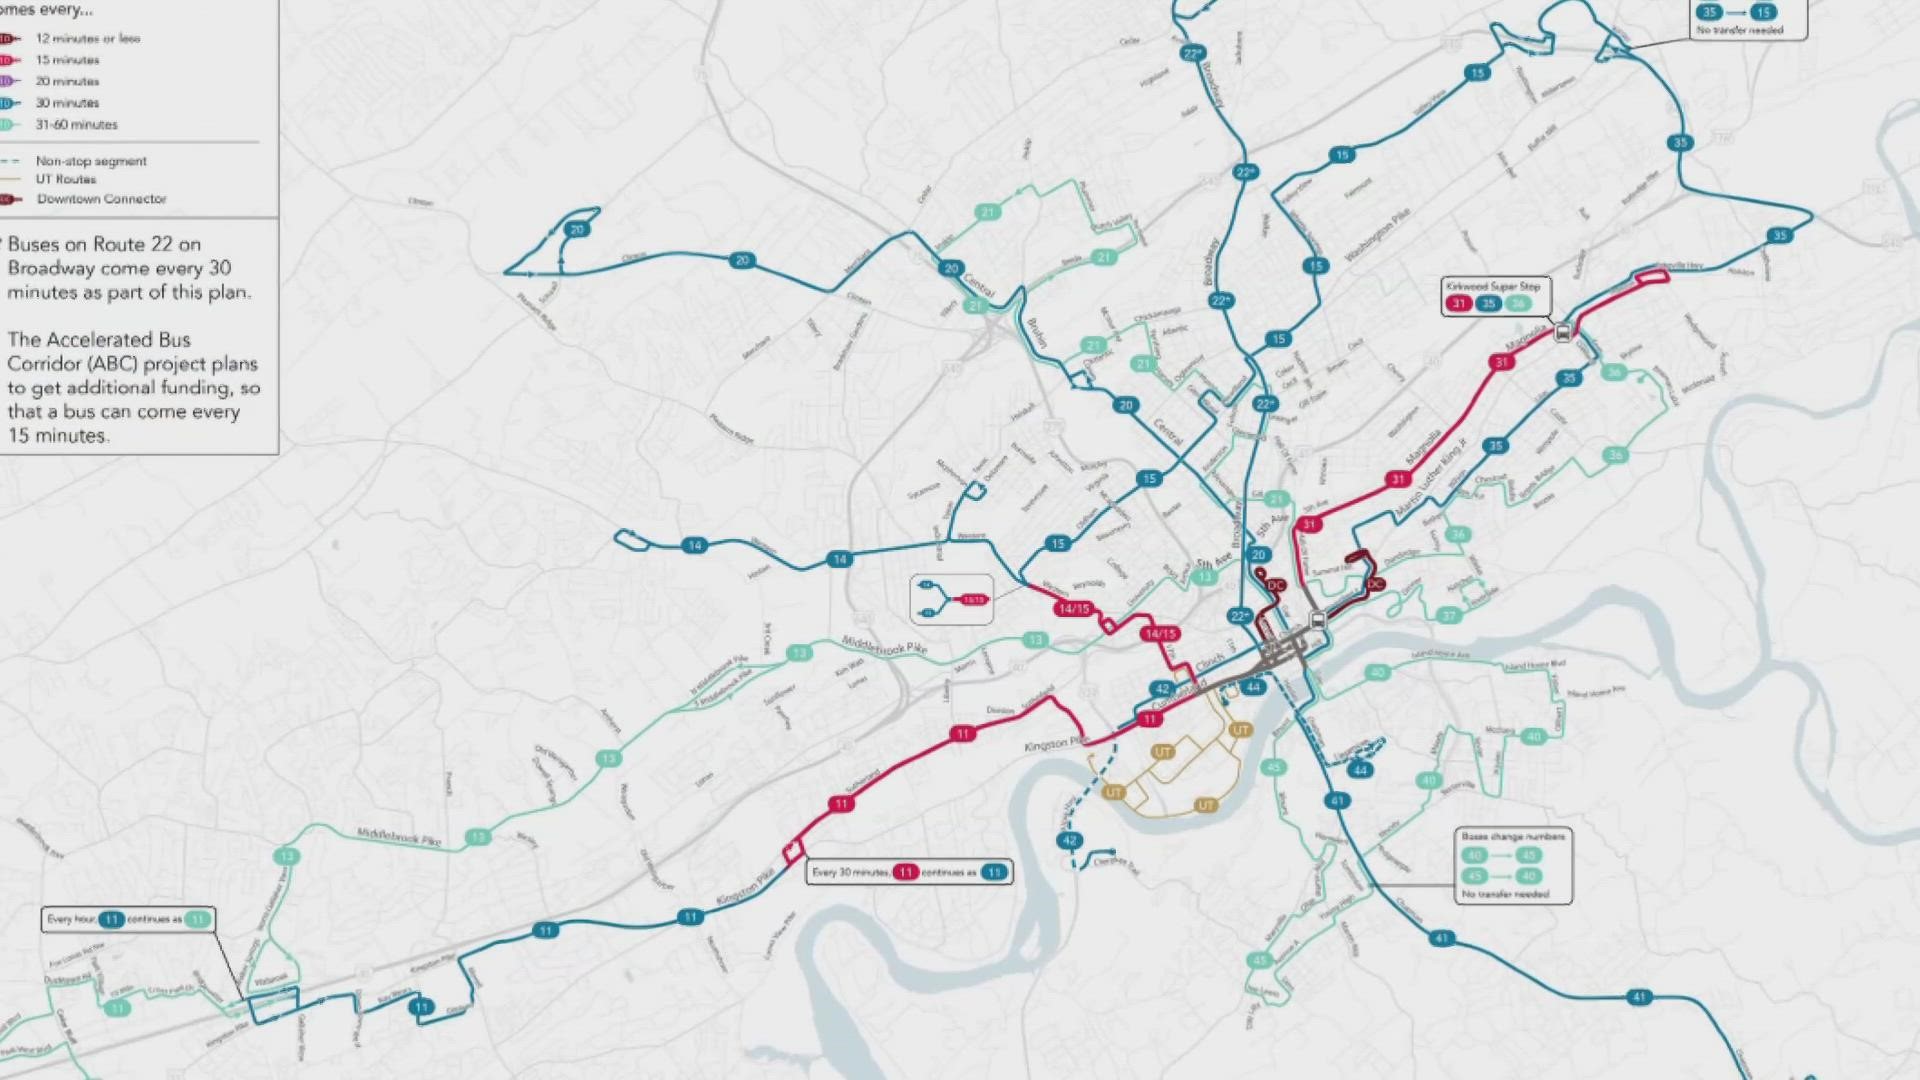 The draft shows how the KAT bus network could run differently within its existing budget.